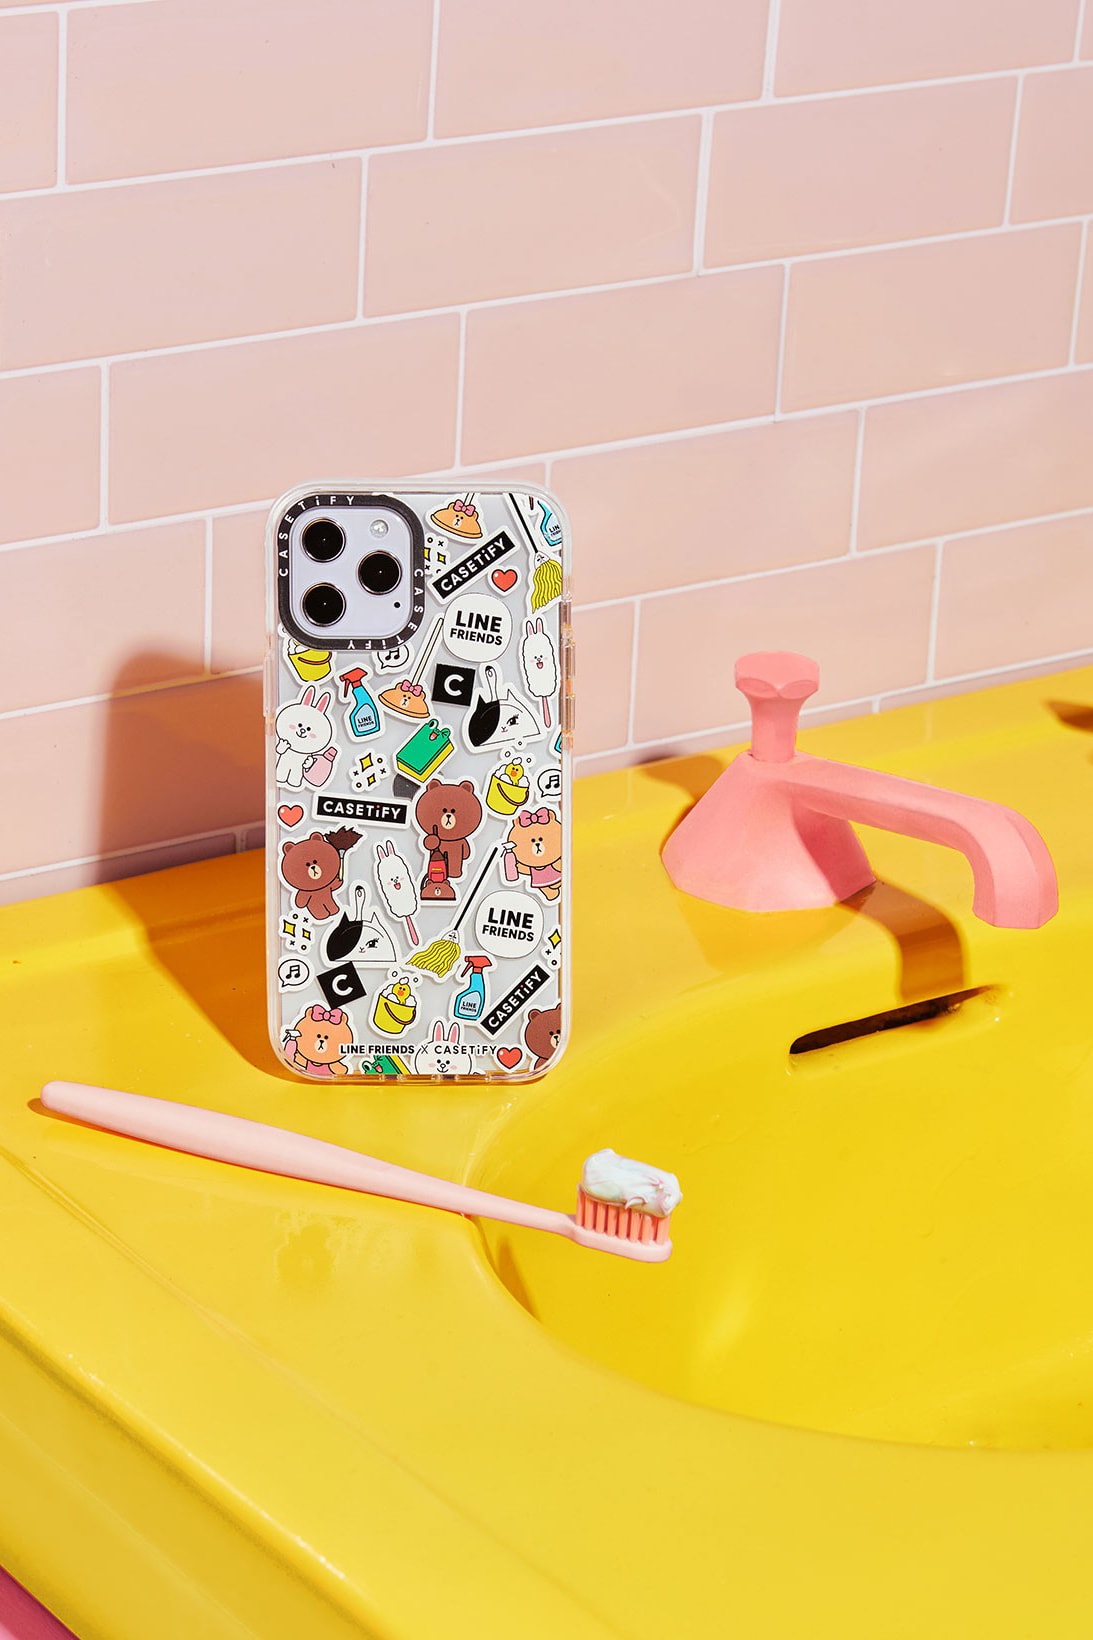 LINE FRIENDS x Casetify Phone iPhone Case Collaboration Collection